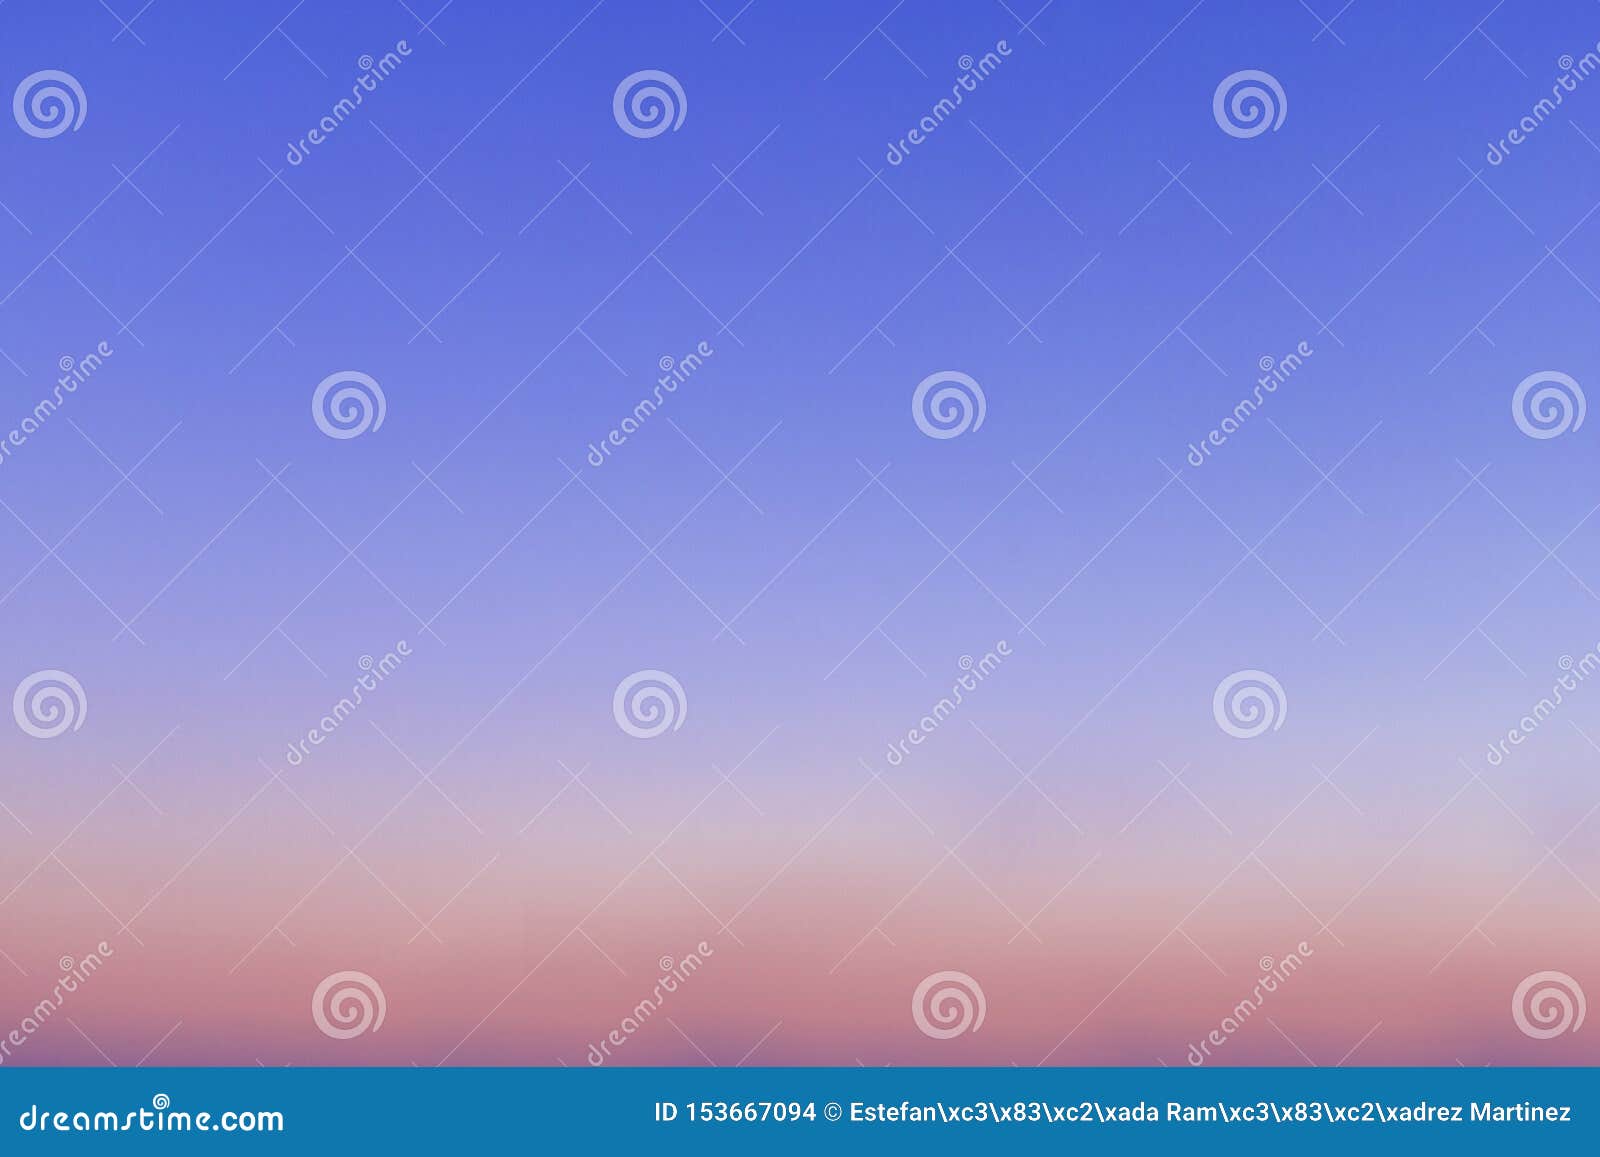 creative photography of sky gradient with  effect